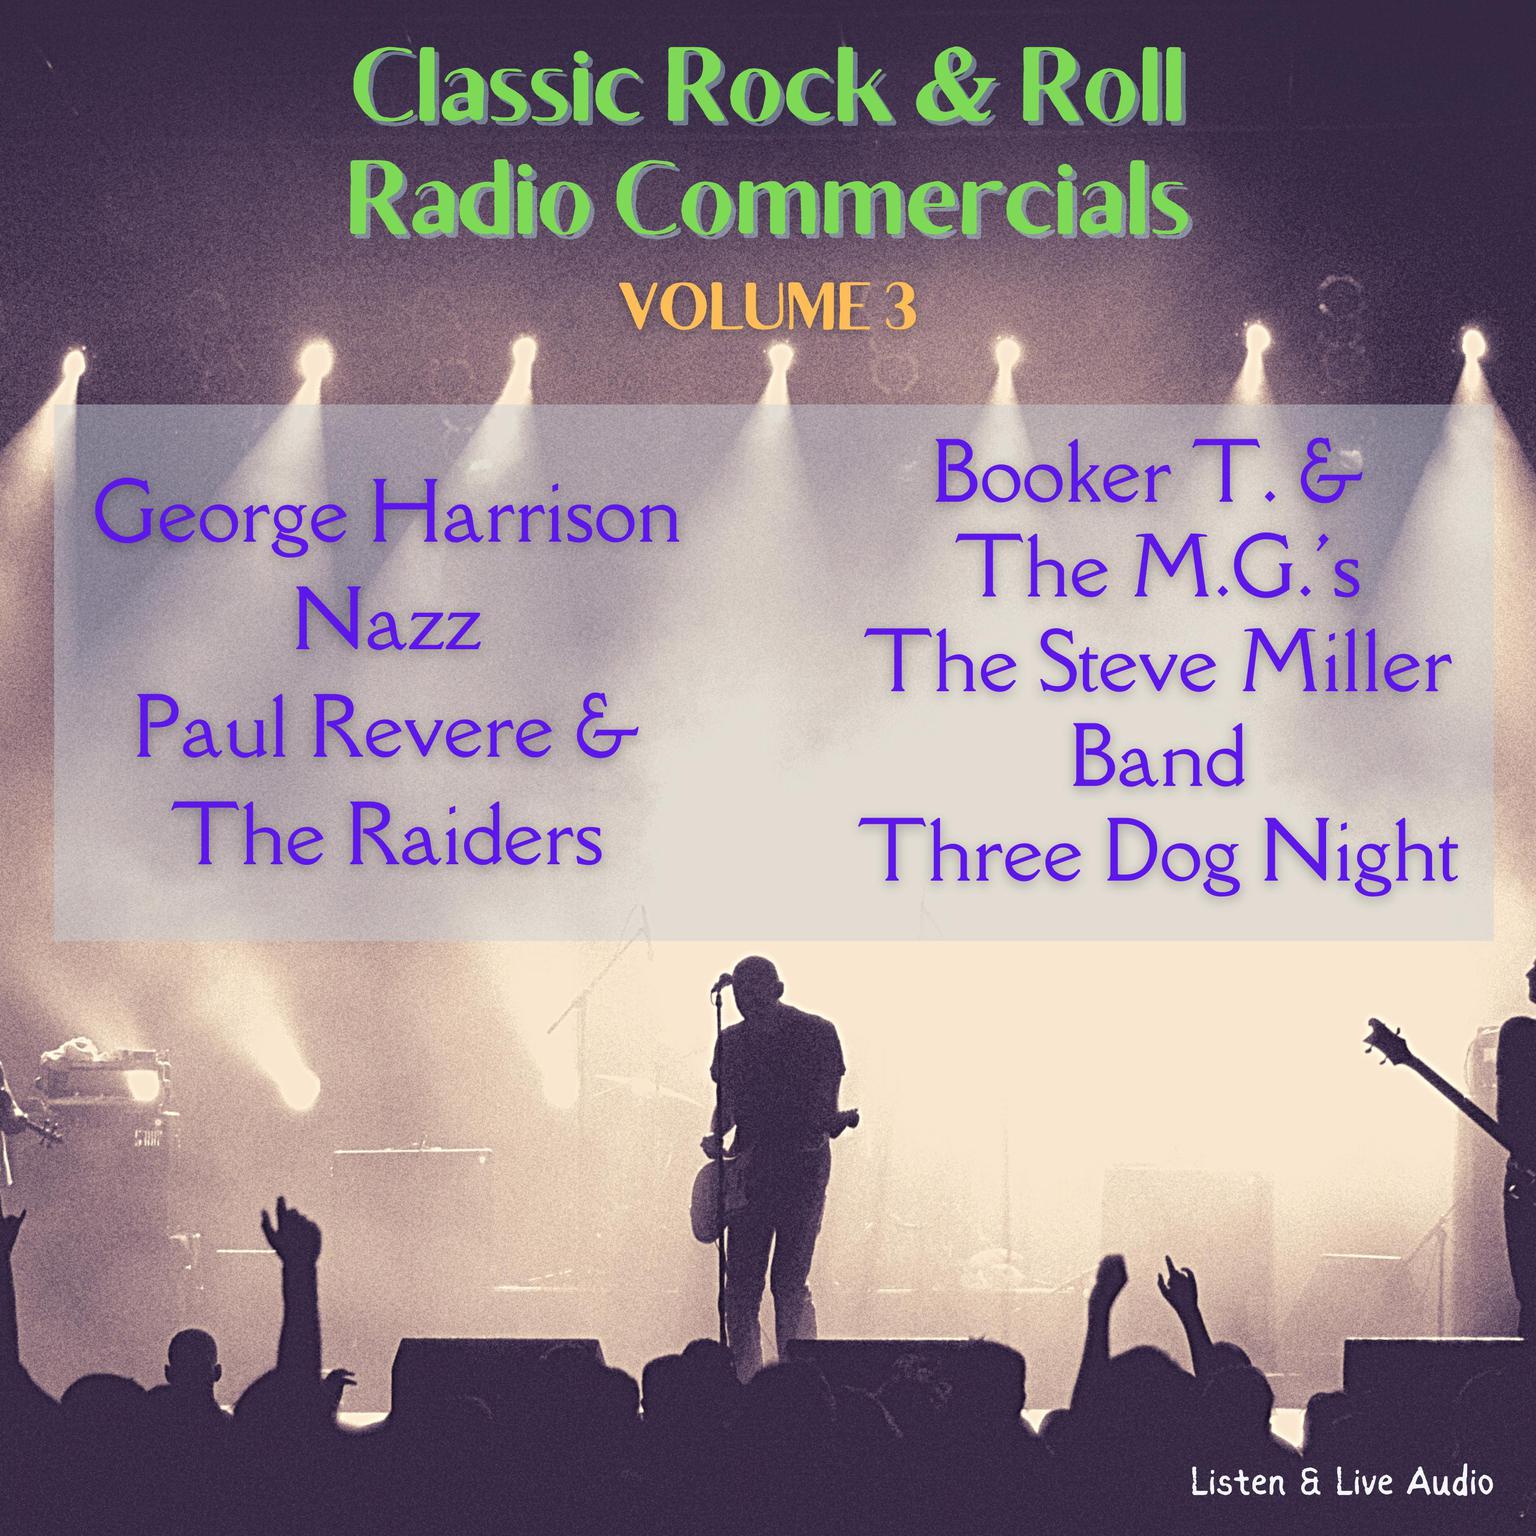 Classic Rock & Rock Radio Commercials - Volume 3 Audiobook, by Booker T. & The M.G.'s